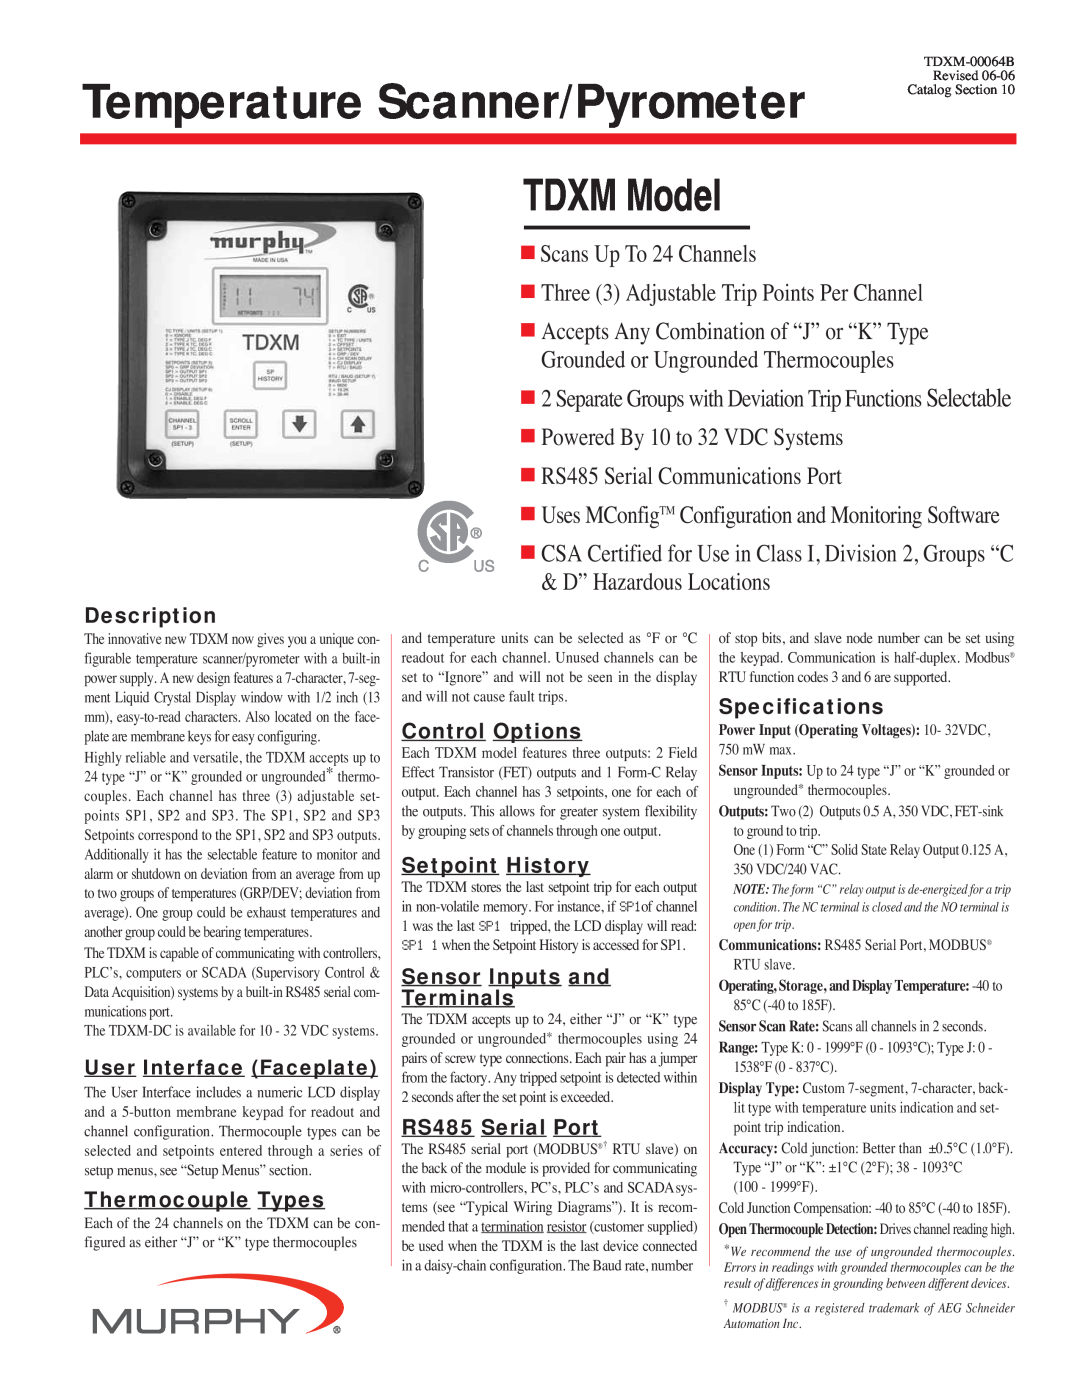 Murphy TDXM specifications Description, Thermocouple Types, Control Options, Setpoint History, Sensor Inputs and Terminals 